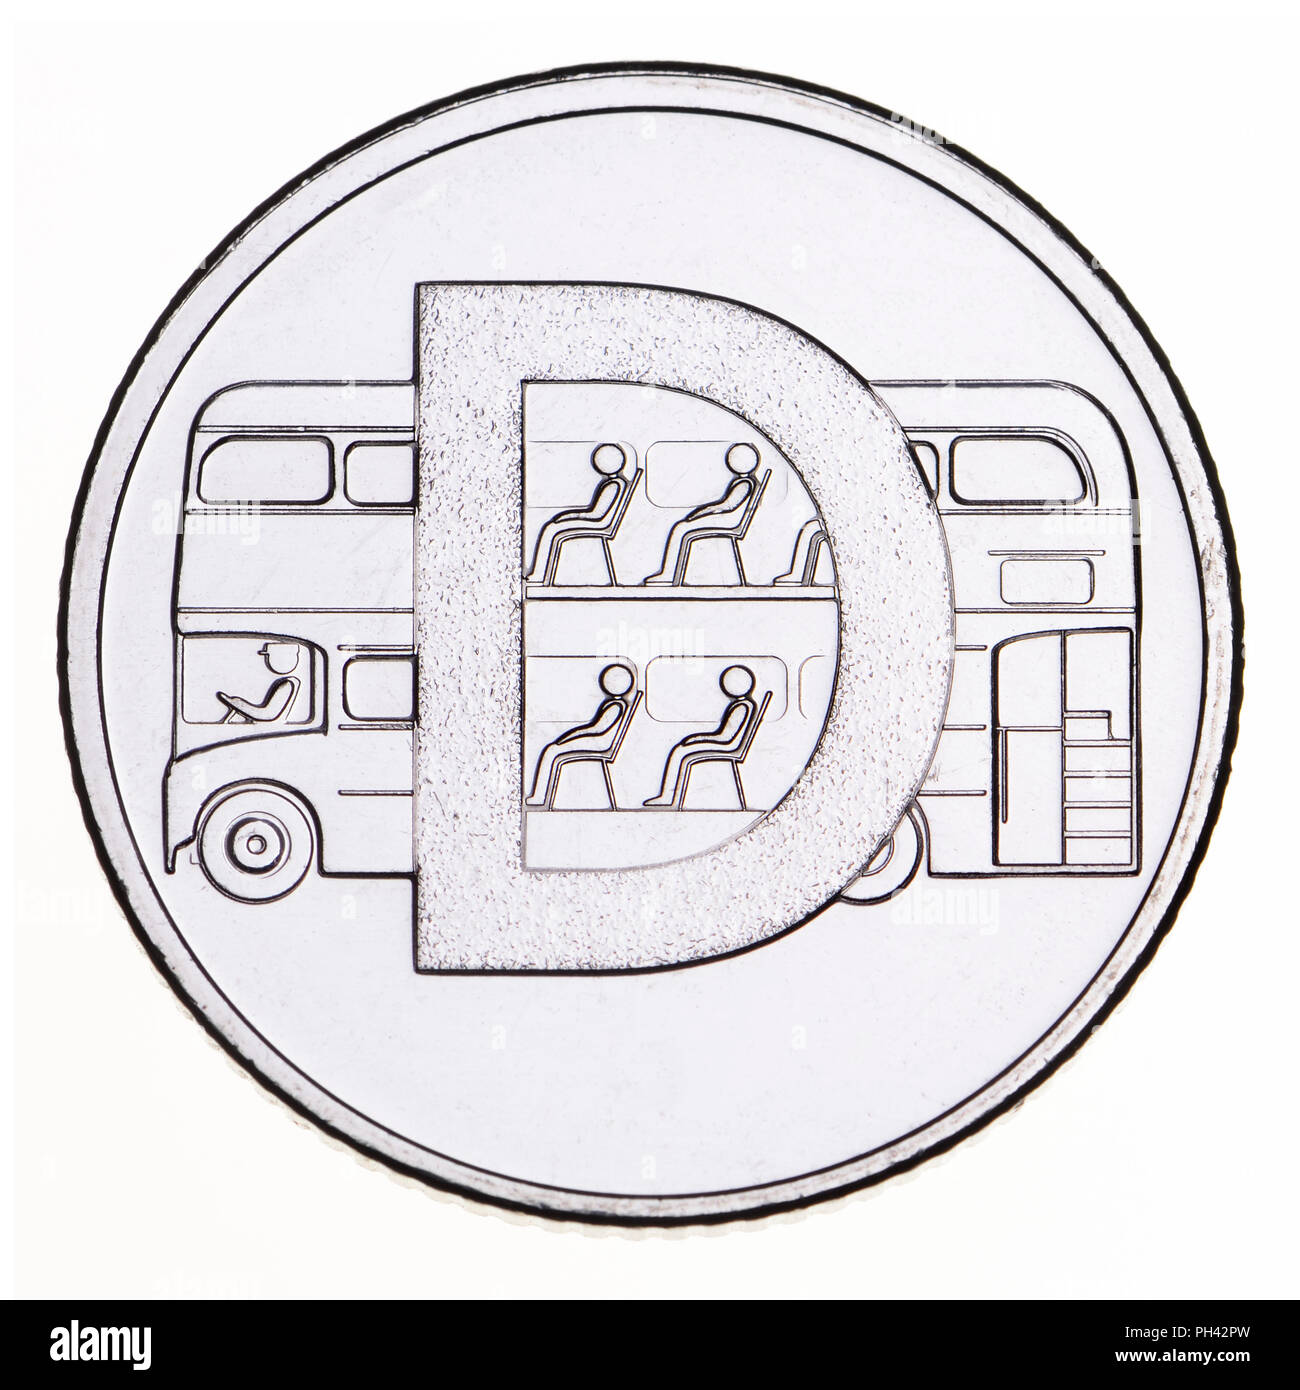 British 10p coin (reverse) from 2018 'Alphabet' series, celebrating Britishness. D - double decker bus Stock Photo